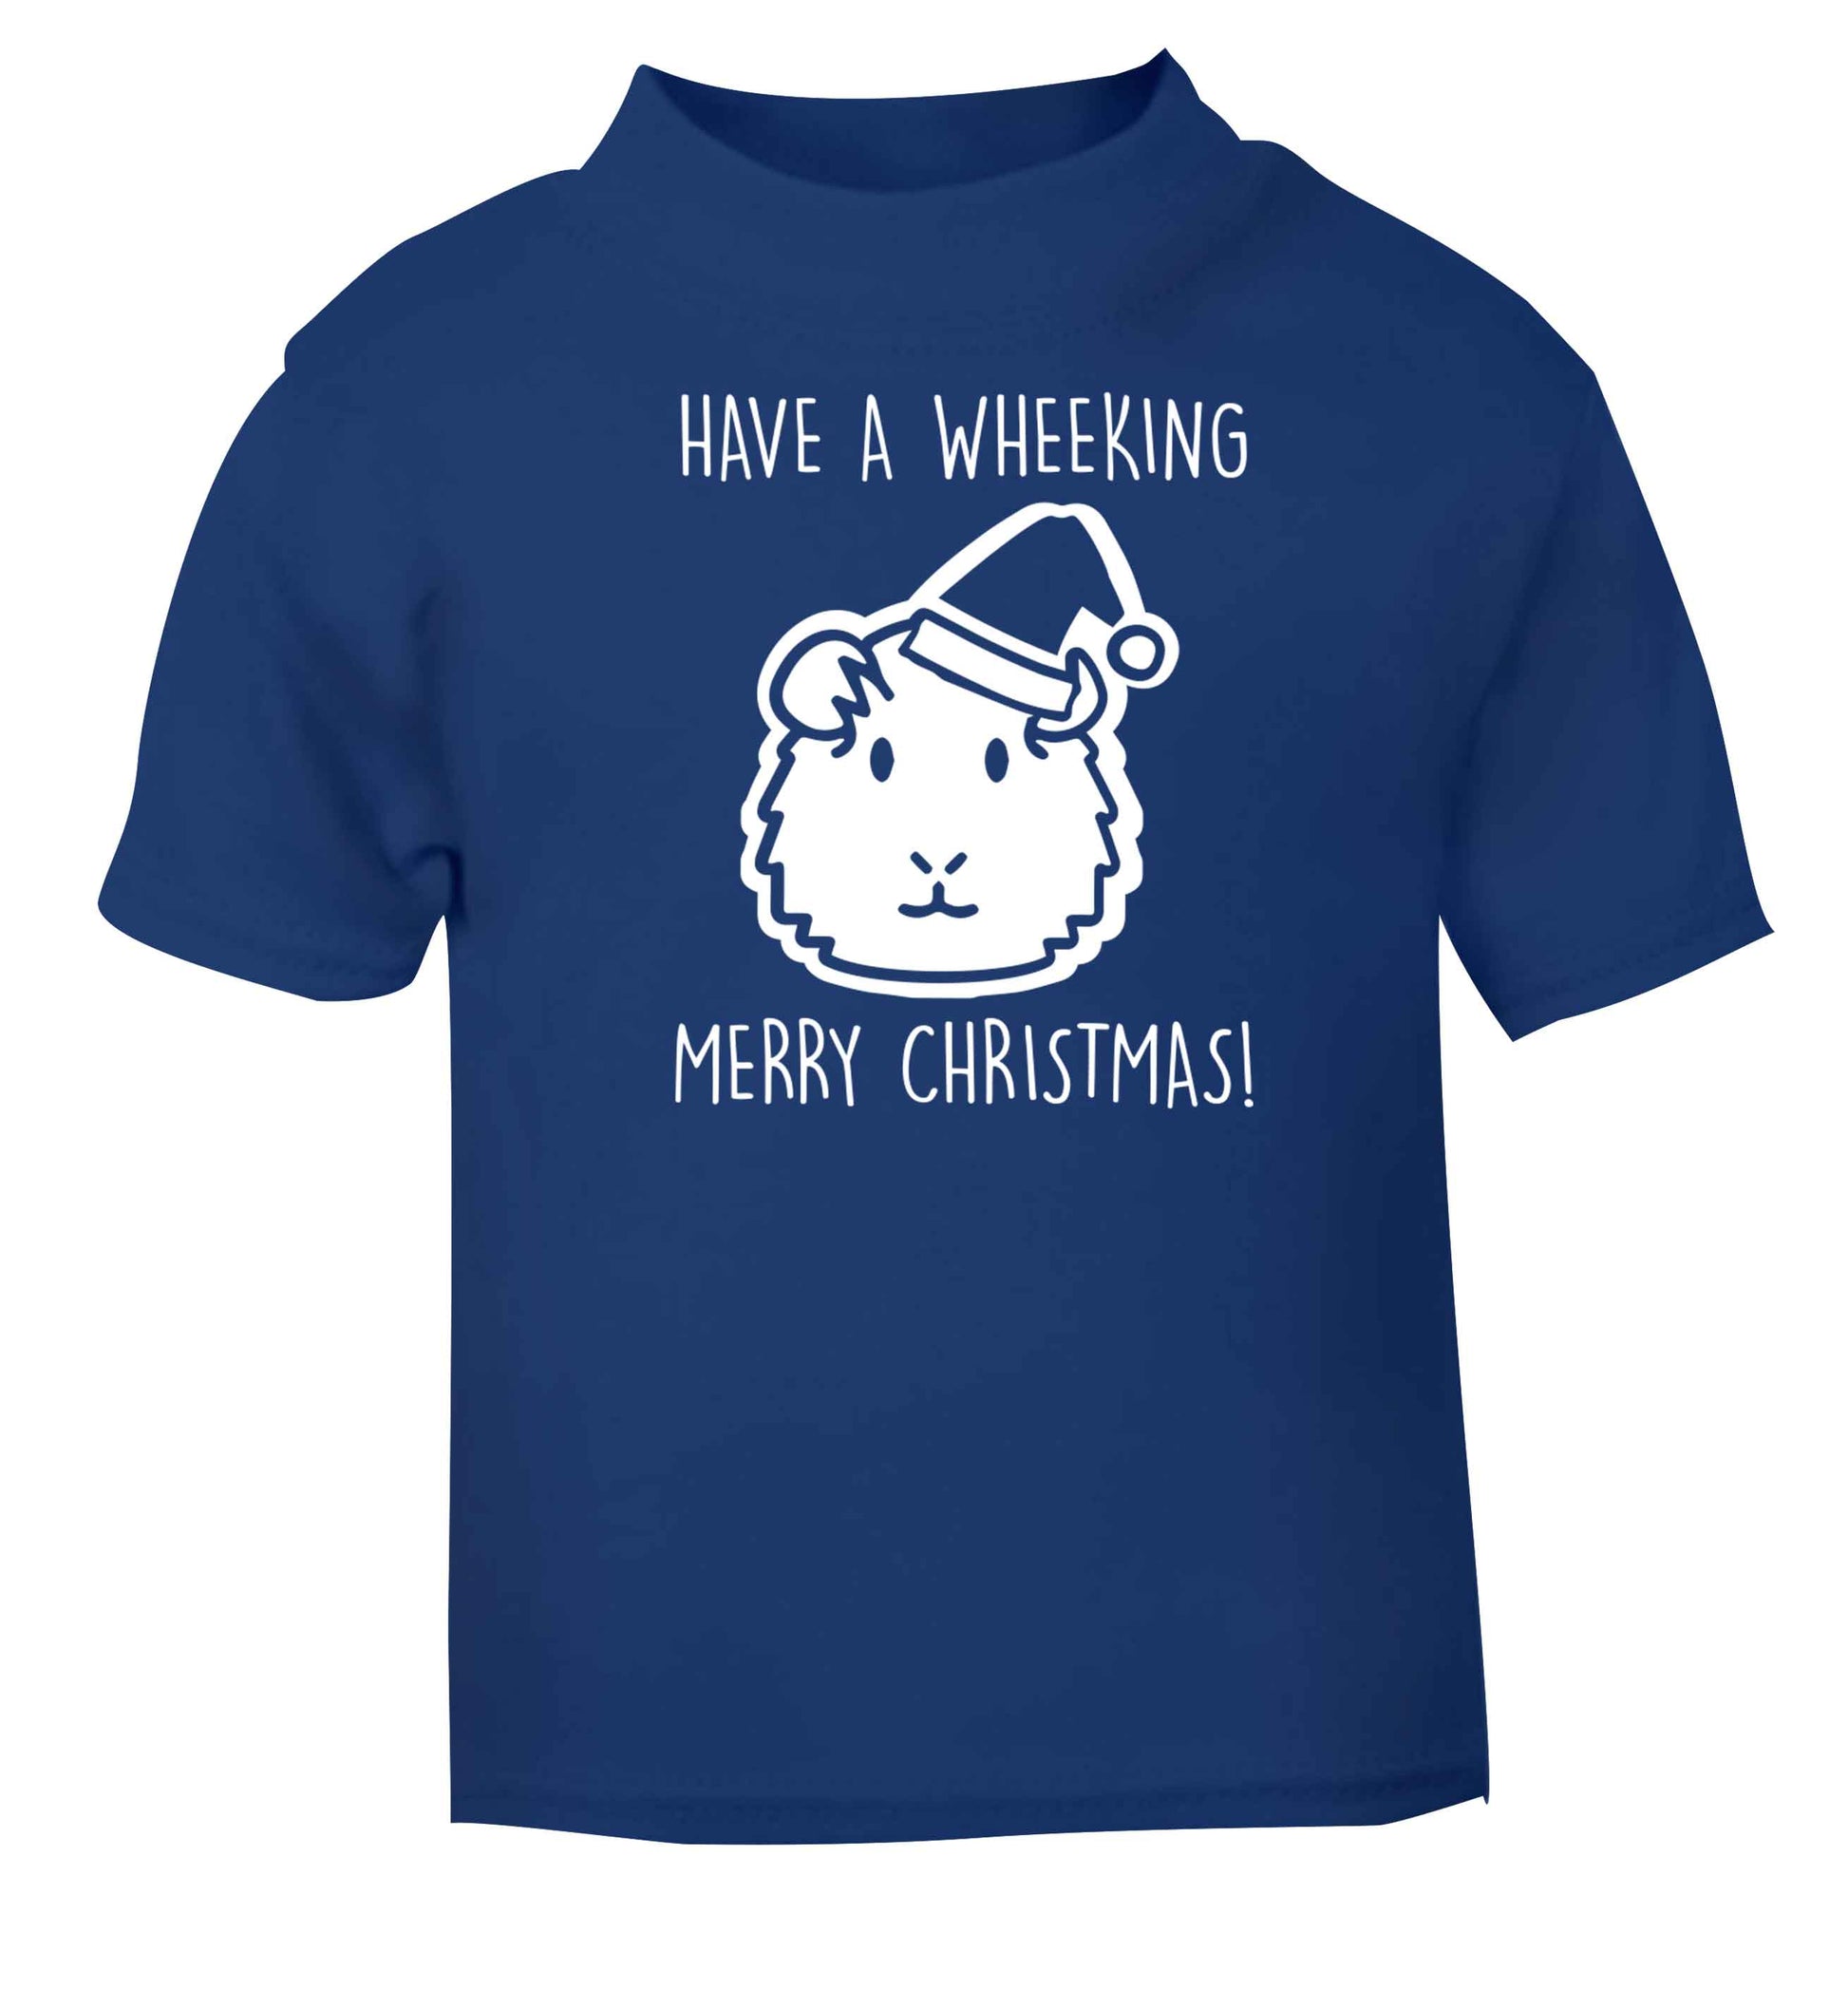 Have a wheeking merry Christmas blue baby toddler Tshirt 2 Years